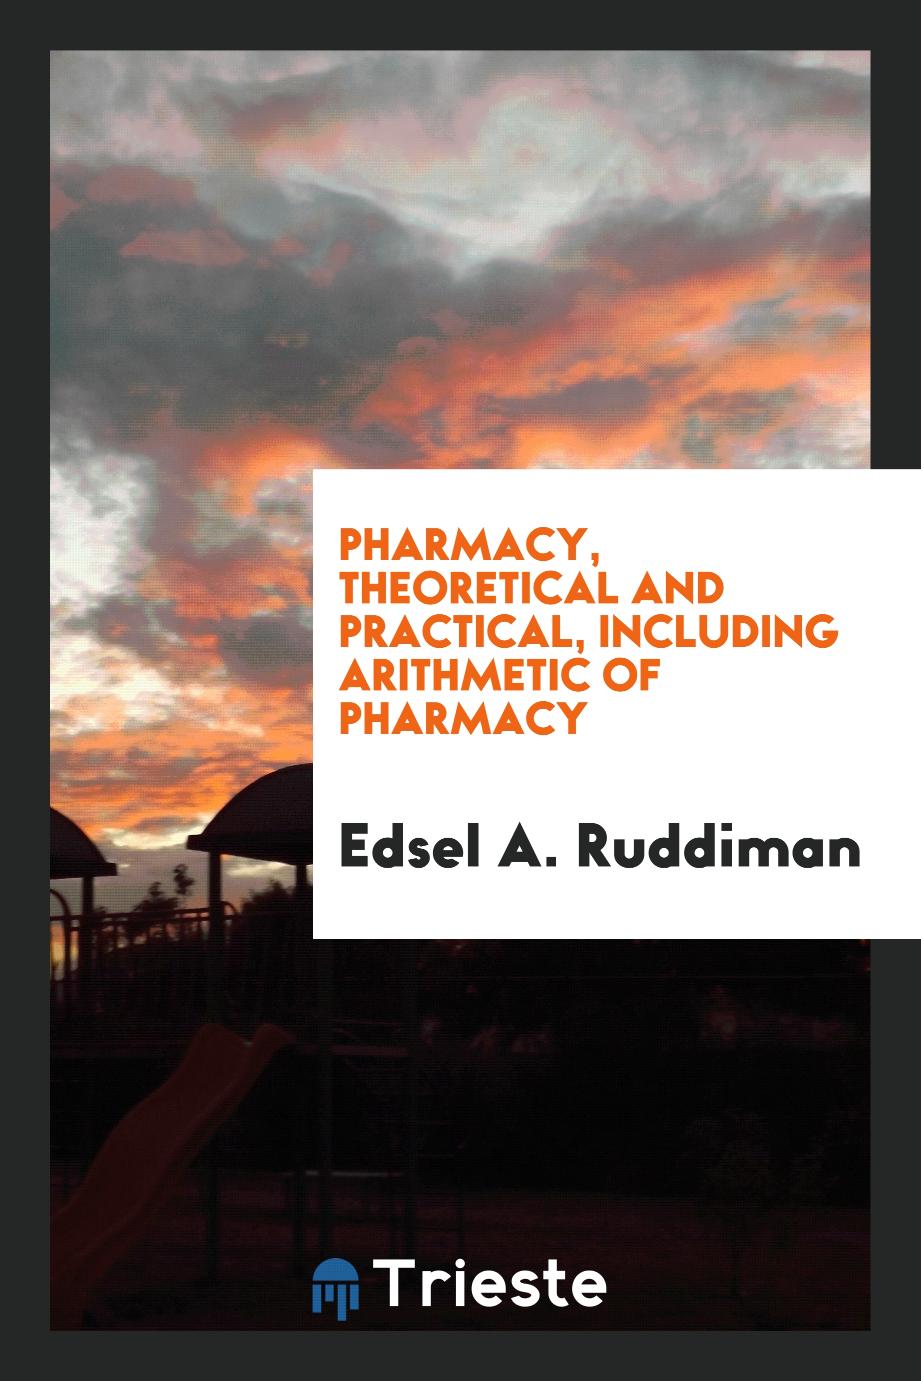 Pharmacy, theoretical and practical, including arithmetic of pharmacy